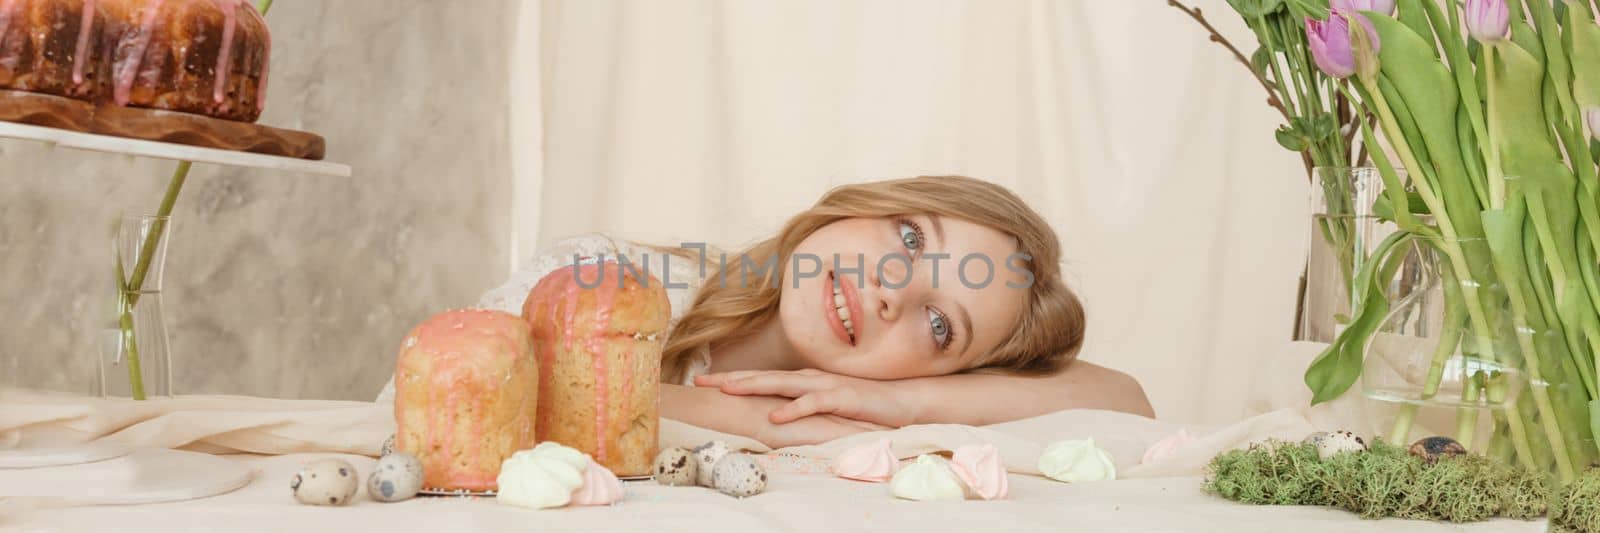 A girl with long hair in a light dress is sitting at the Easter table with cakes, spring flowers and quail eggs. Happy Easter celebration